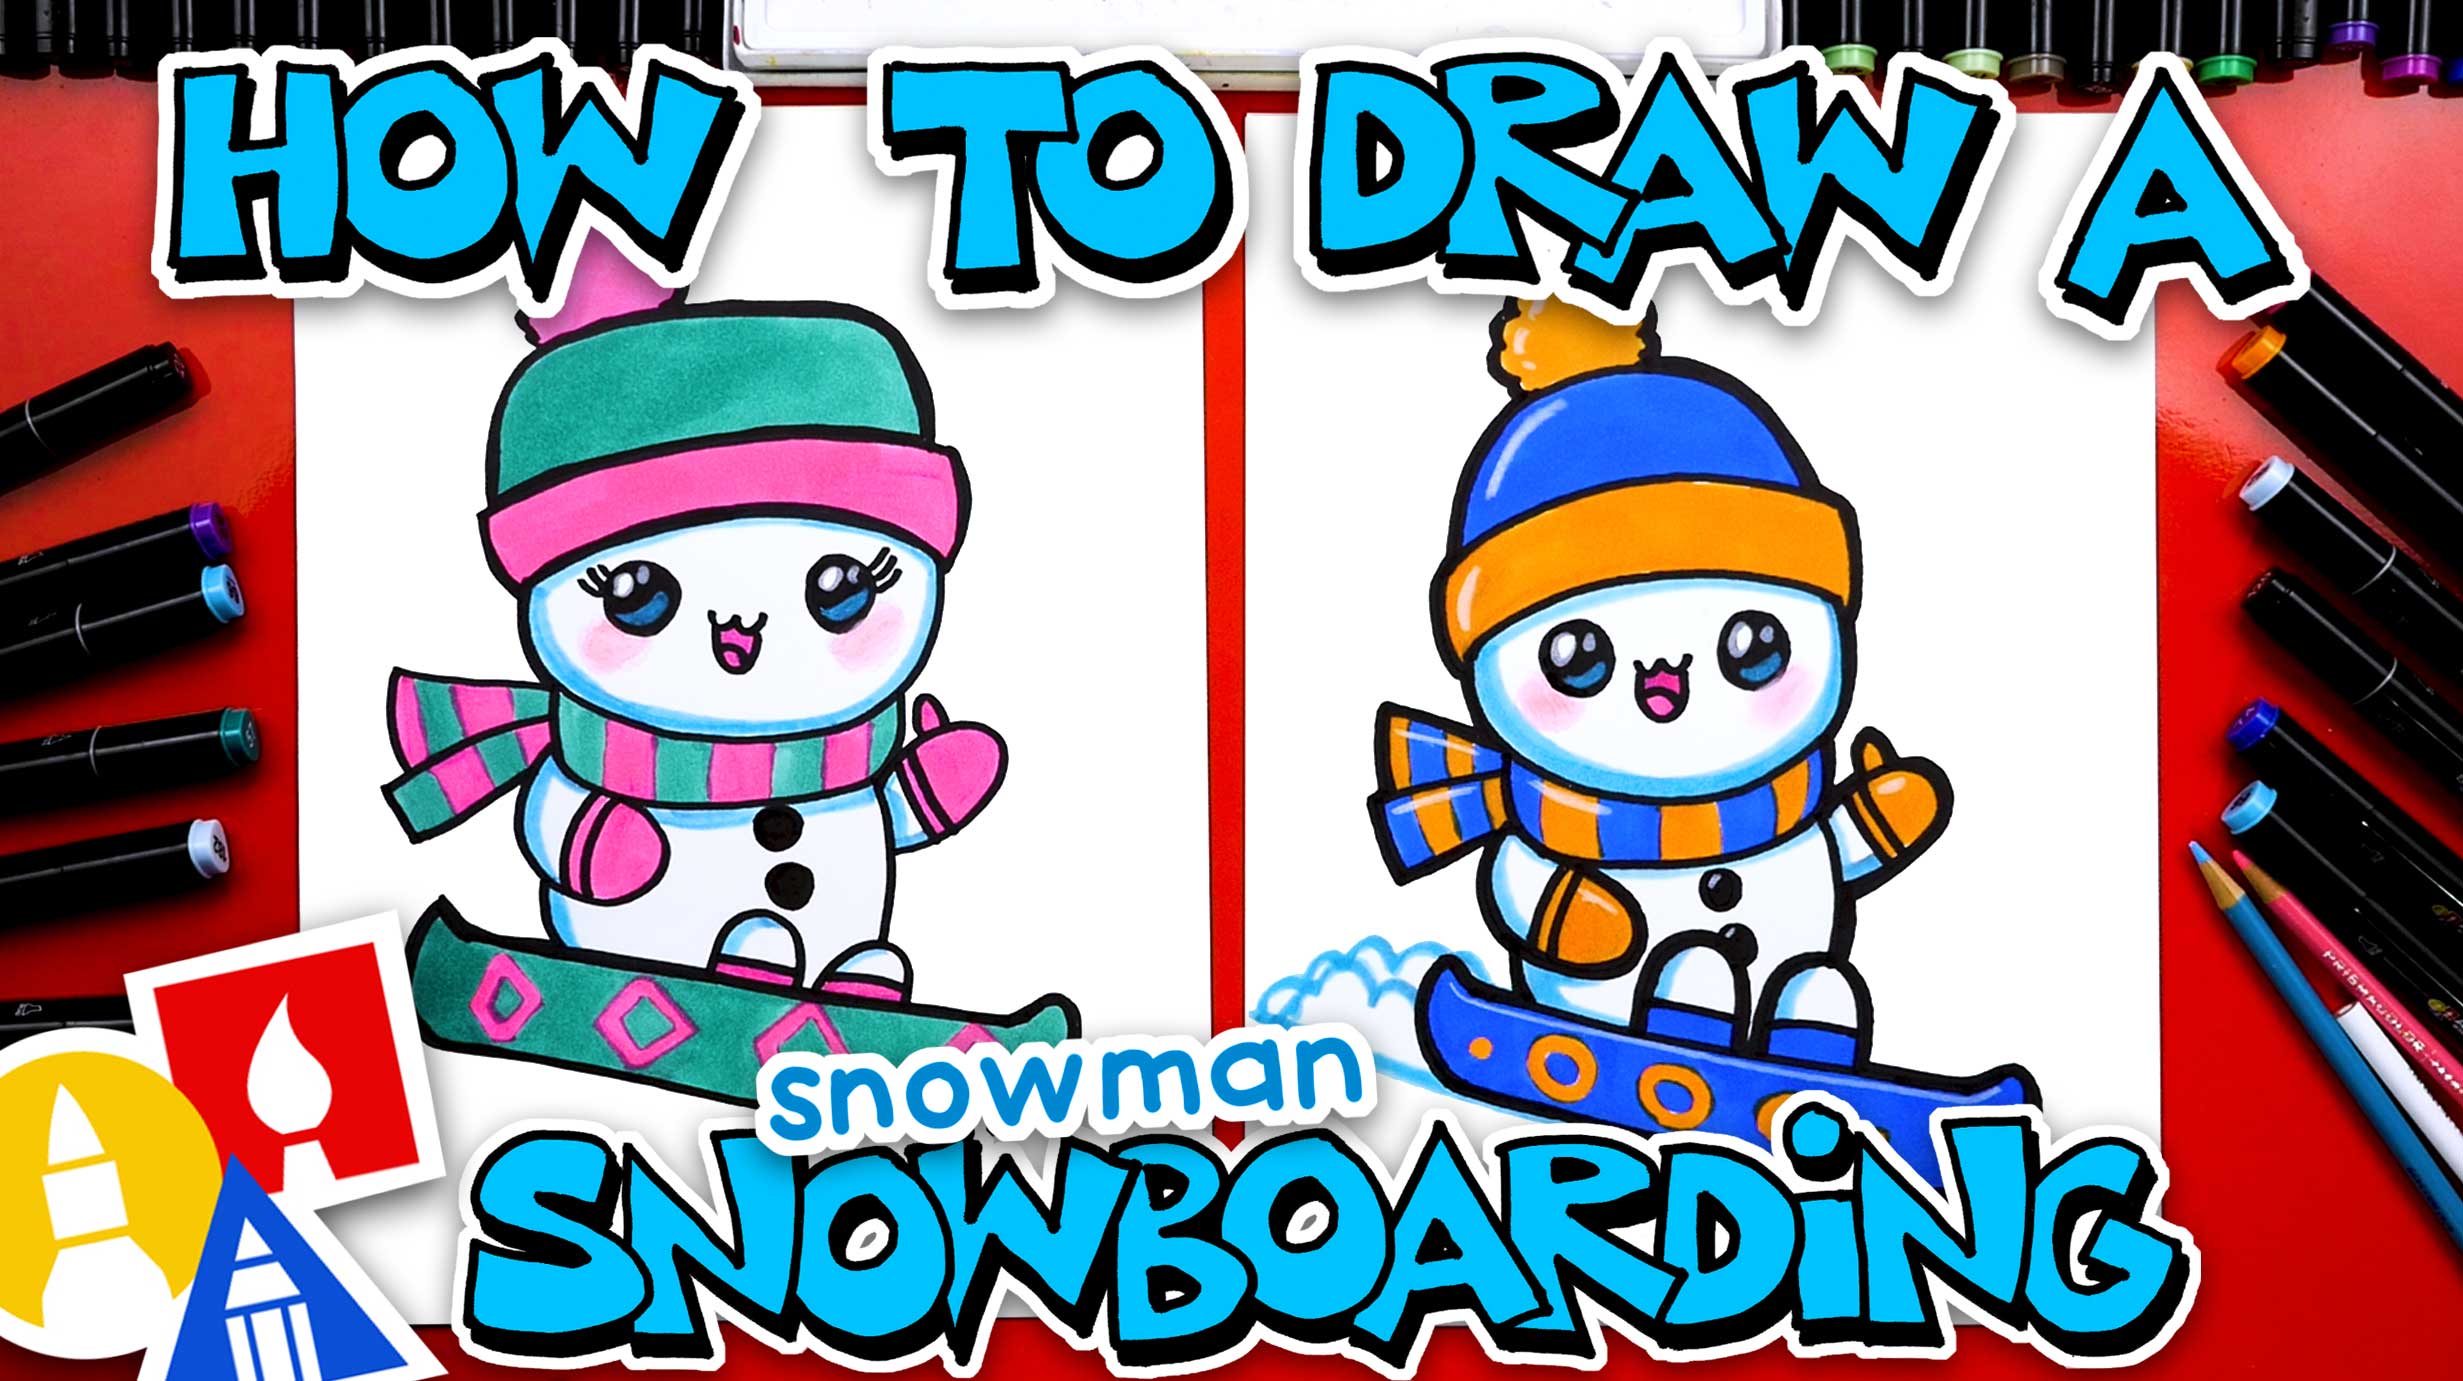 How To Draw A Snowman Snowboarding Art For Kids Hub